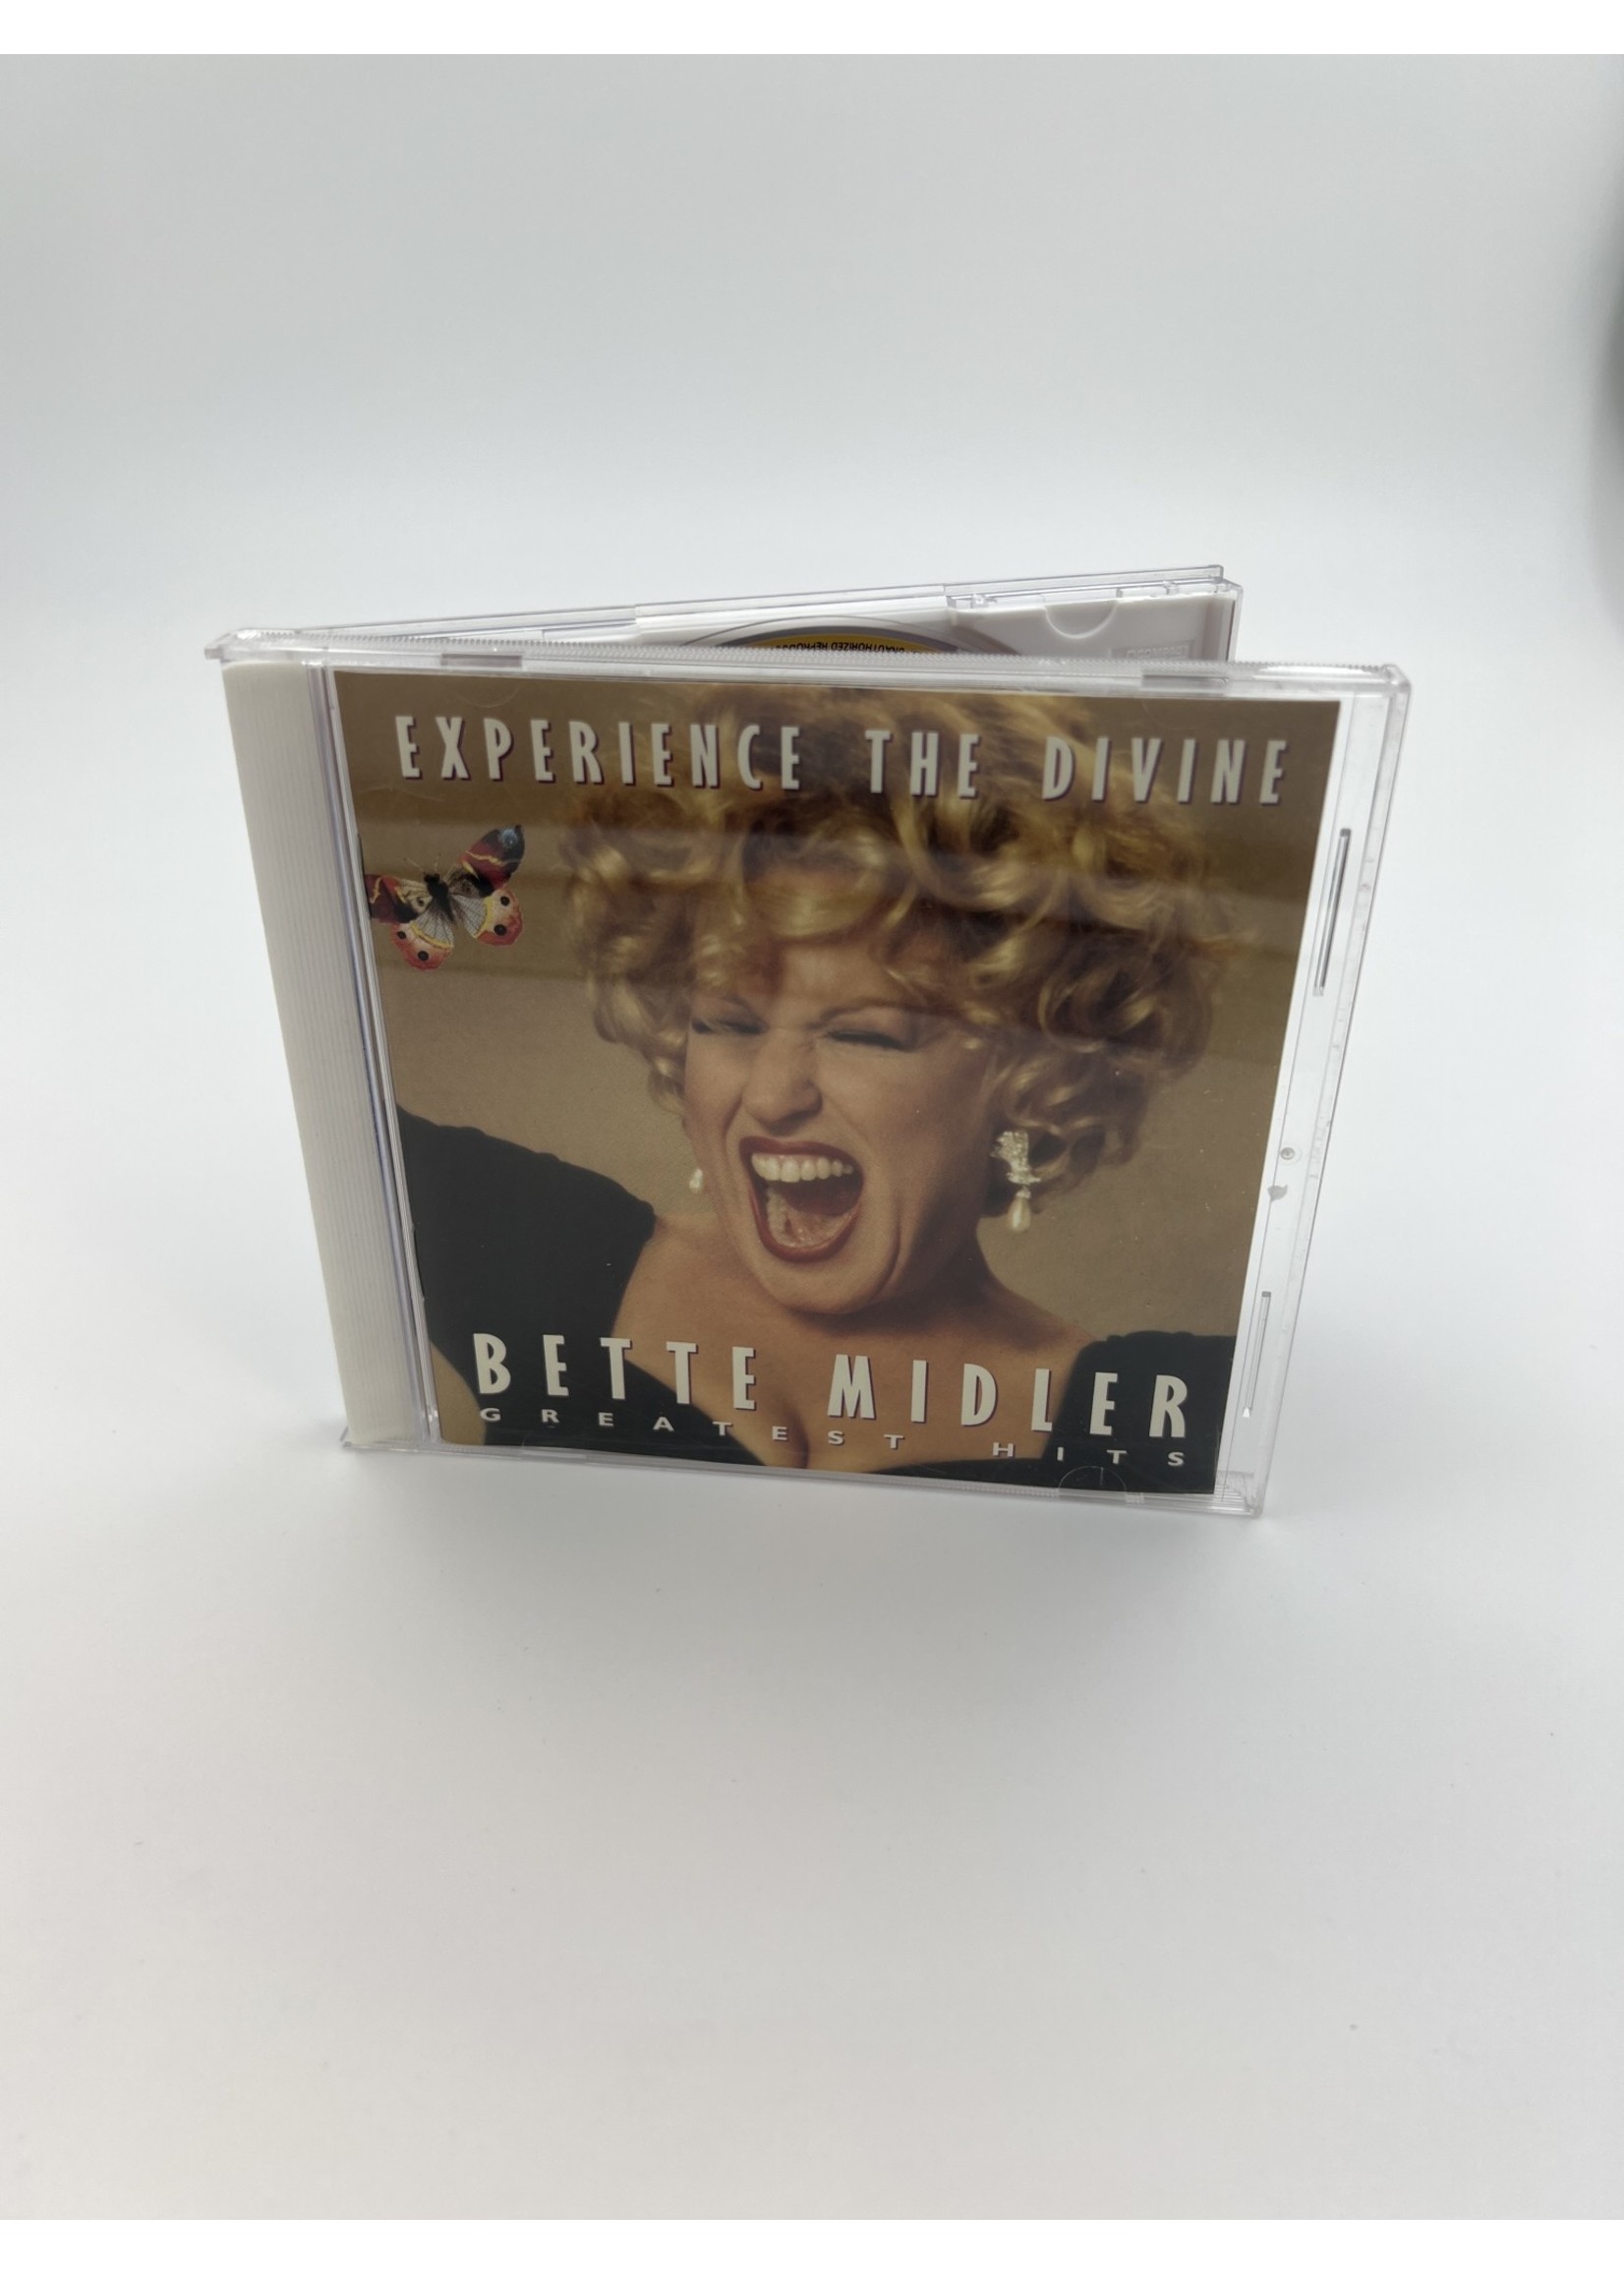 CD Bette Midler Greatest Hits Experience The Divine CD